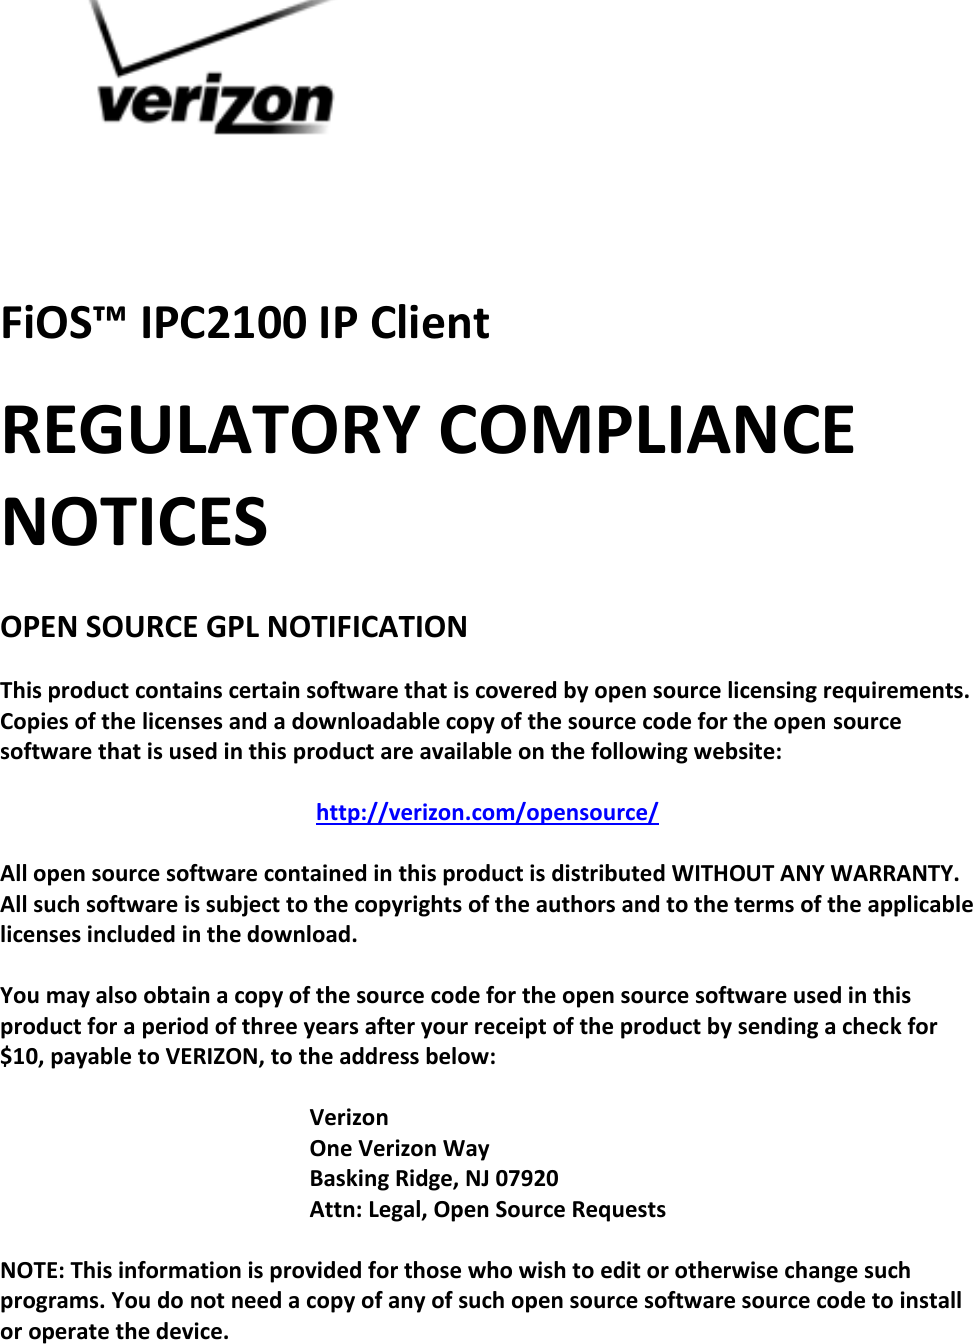   FiOS™ IPC2100 IP Client REGULATORY COMPLIANCE NOTICES  OPEN SOURCE GPL NOTIFICATION  This product contains certain software that is covered by open source licensing requirements. Copies of the licenses and a downloadable copy of the source code for the open source software that is used in this product are available on the following website:  http://verizon.com/opensource/  All open source software contained in this product is distributed WITHOUT ANY WARRANTY. All such software is subject to the copyrights of the authors and to the terms of the applicable licenses included in the download.  You may also obtain a copy of the source code for the open source software used in this product for a period of three years after your receipt of the product by sending a check for $10, payable to VERIZON, to the address below:  Verizon One Verizon Way Basking Ridge, NJ 07920 Attn: Legal, Open Source Requests  NOTE: This information is provided for those who wish to edit or otherwise change such programs. You do not need a copy of any of such open source software source code to install or operate the device.    